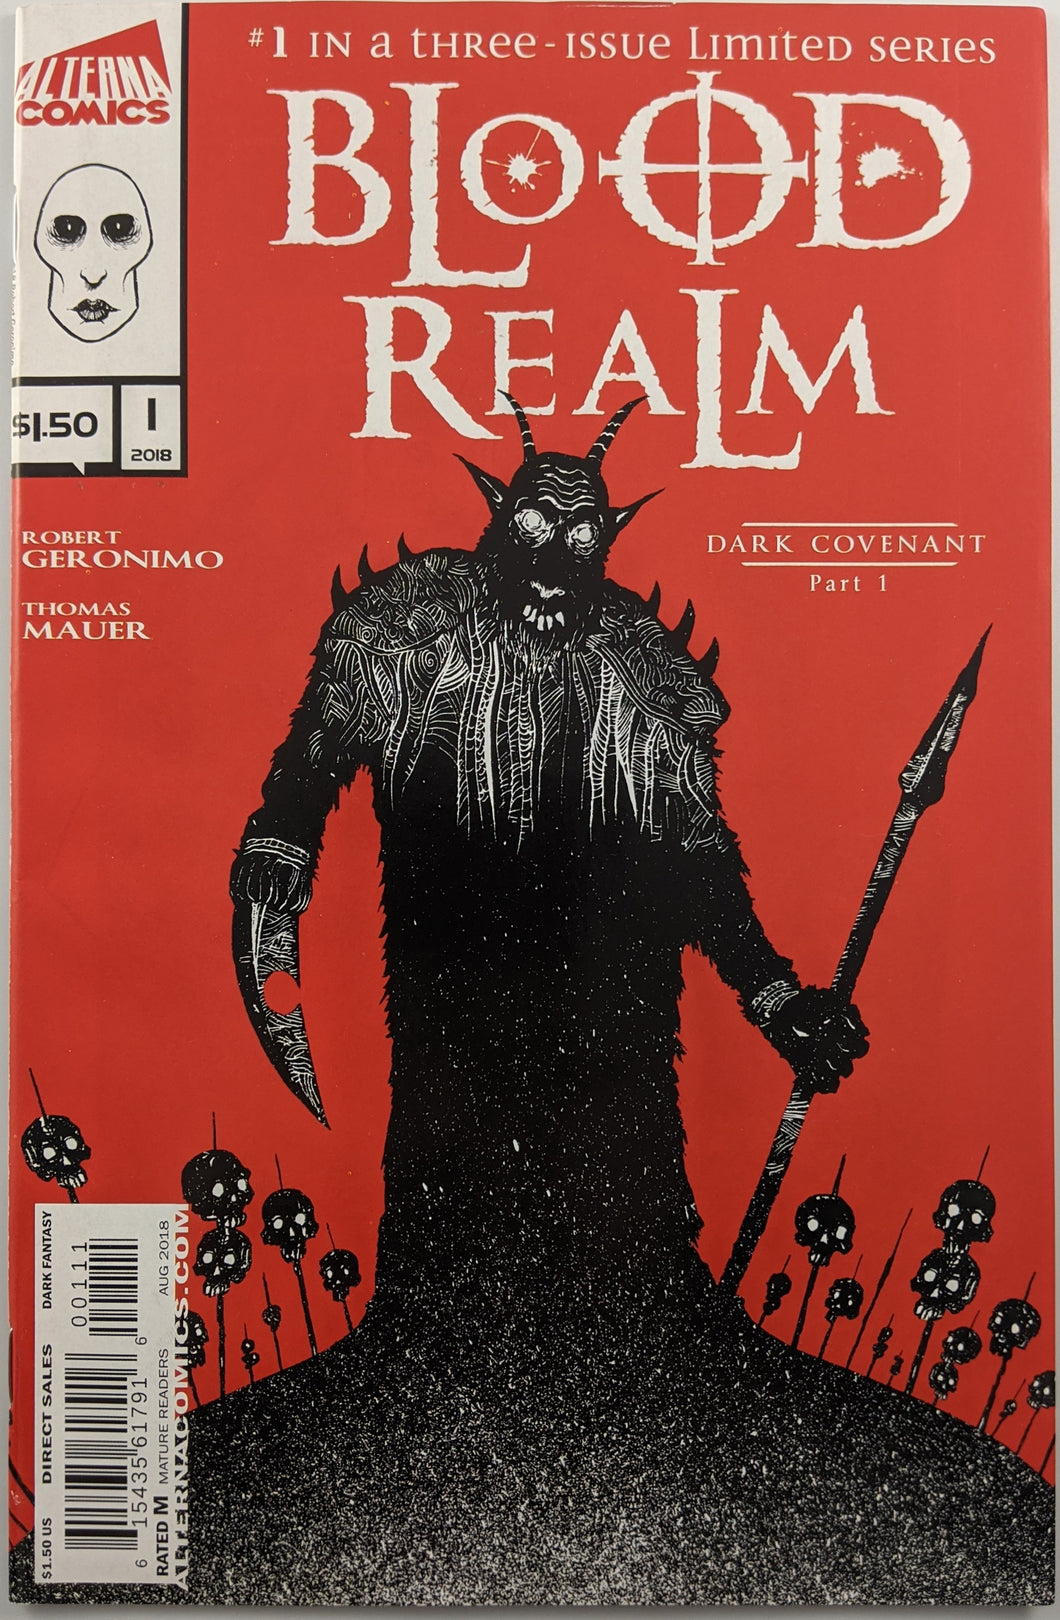 Blood Realm (2018) #1